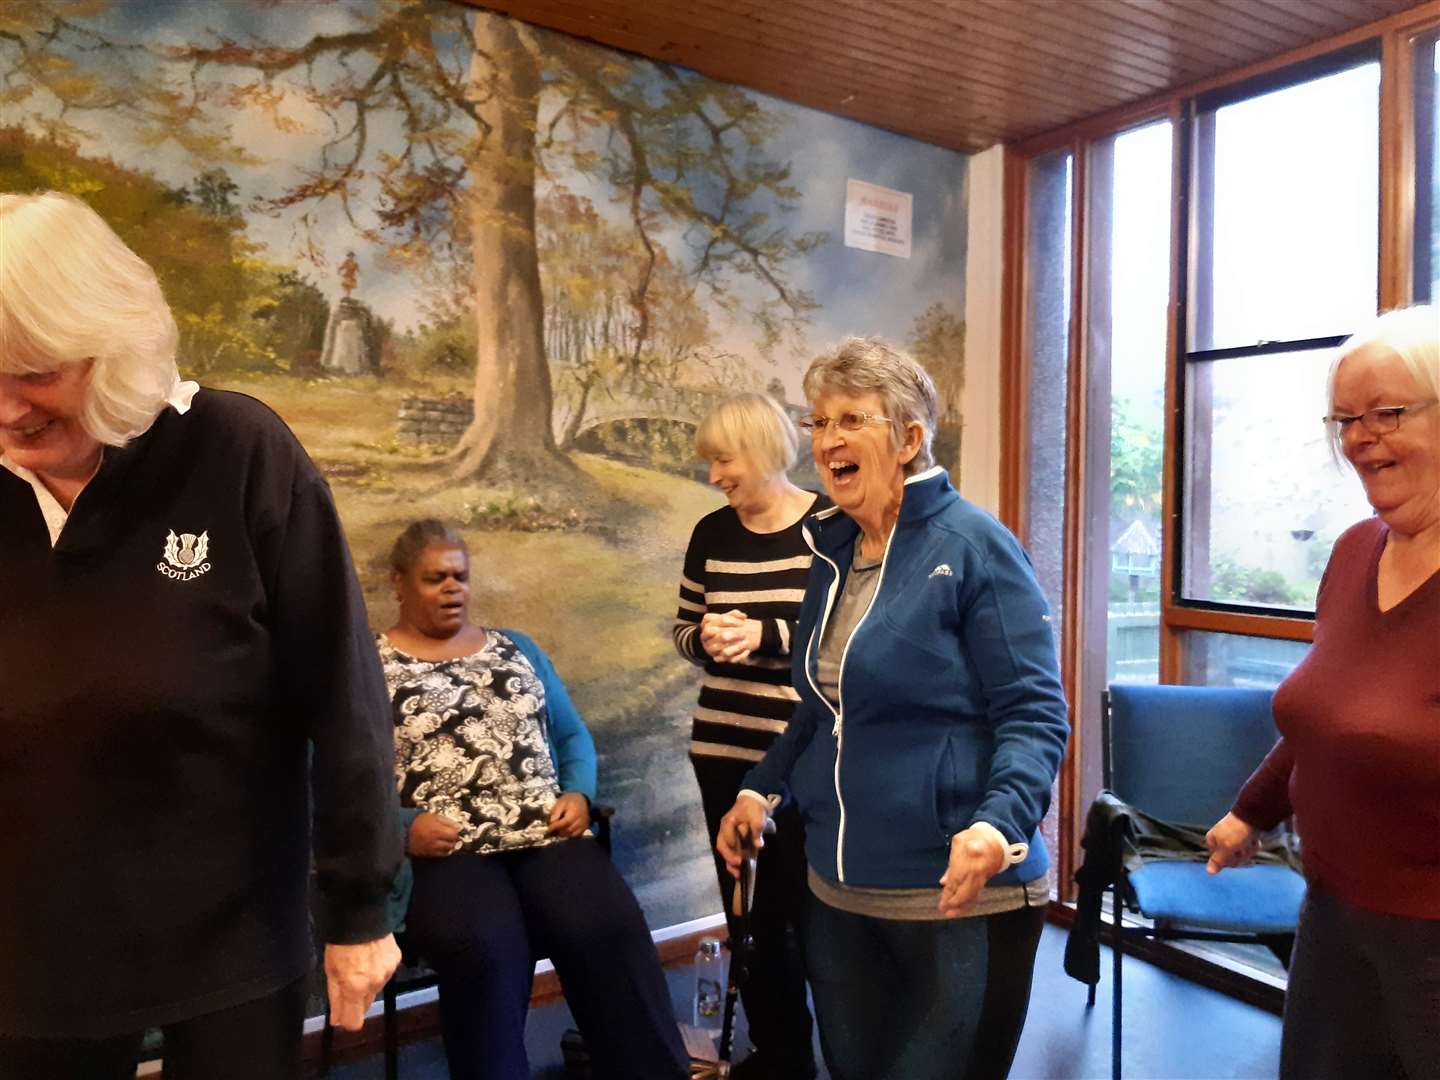 Over 55s took part in a laughter yoga session at Forres House Community Centre on Monday.